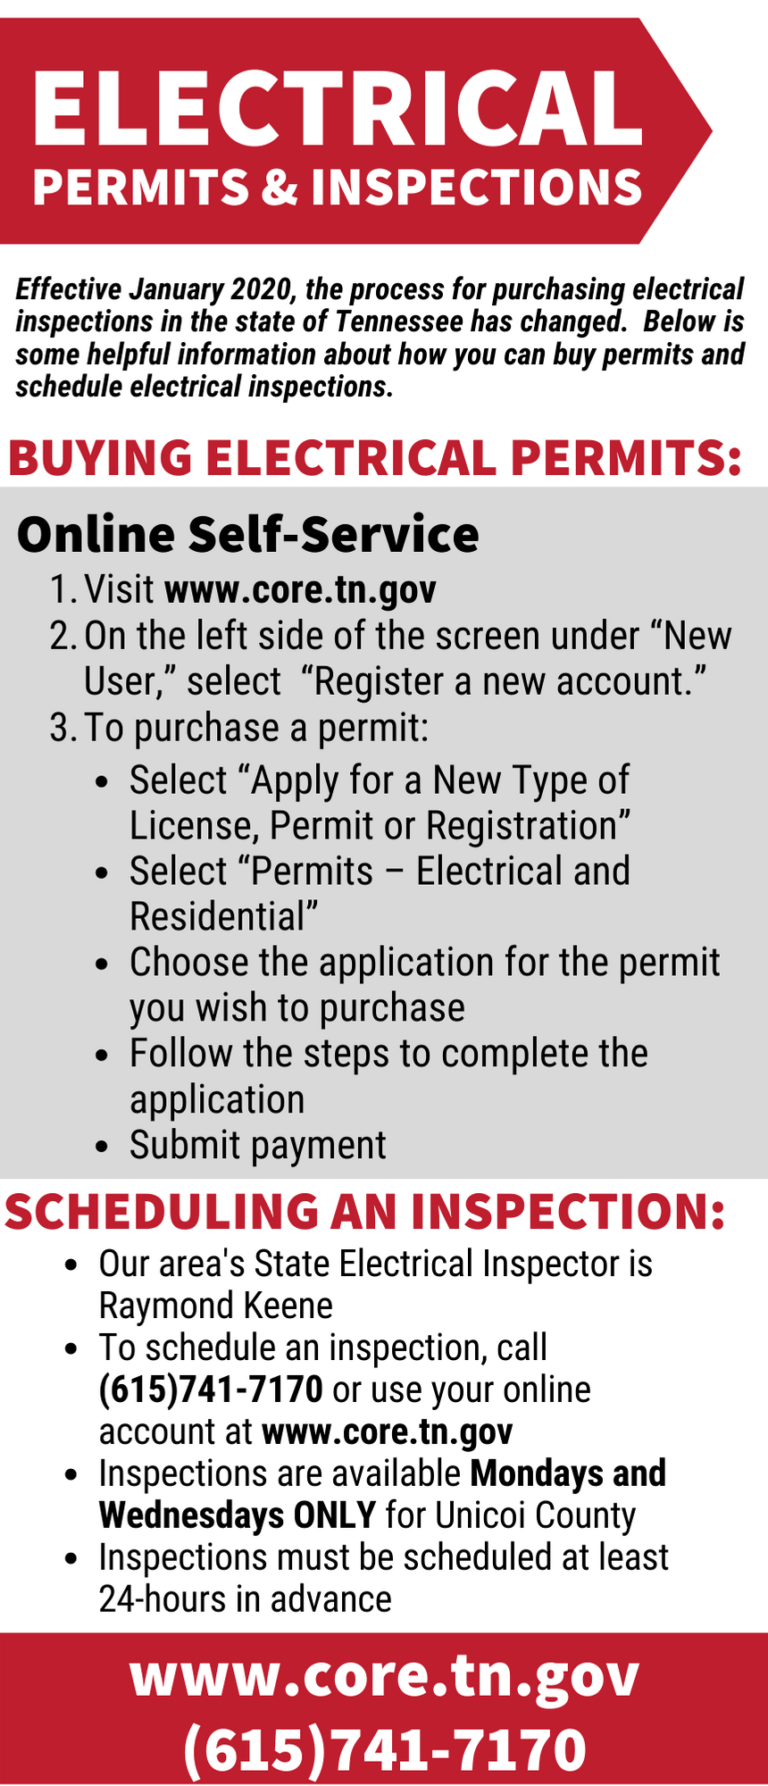 Electrical Permits & Inspections Erwin Utilities